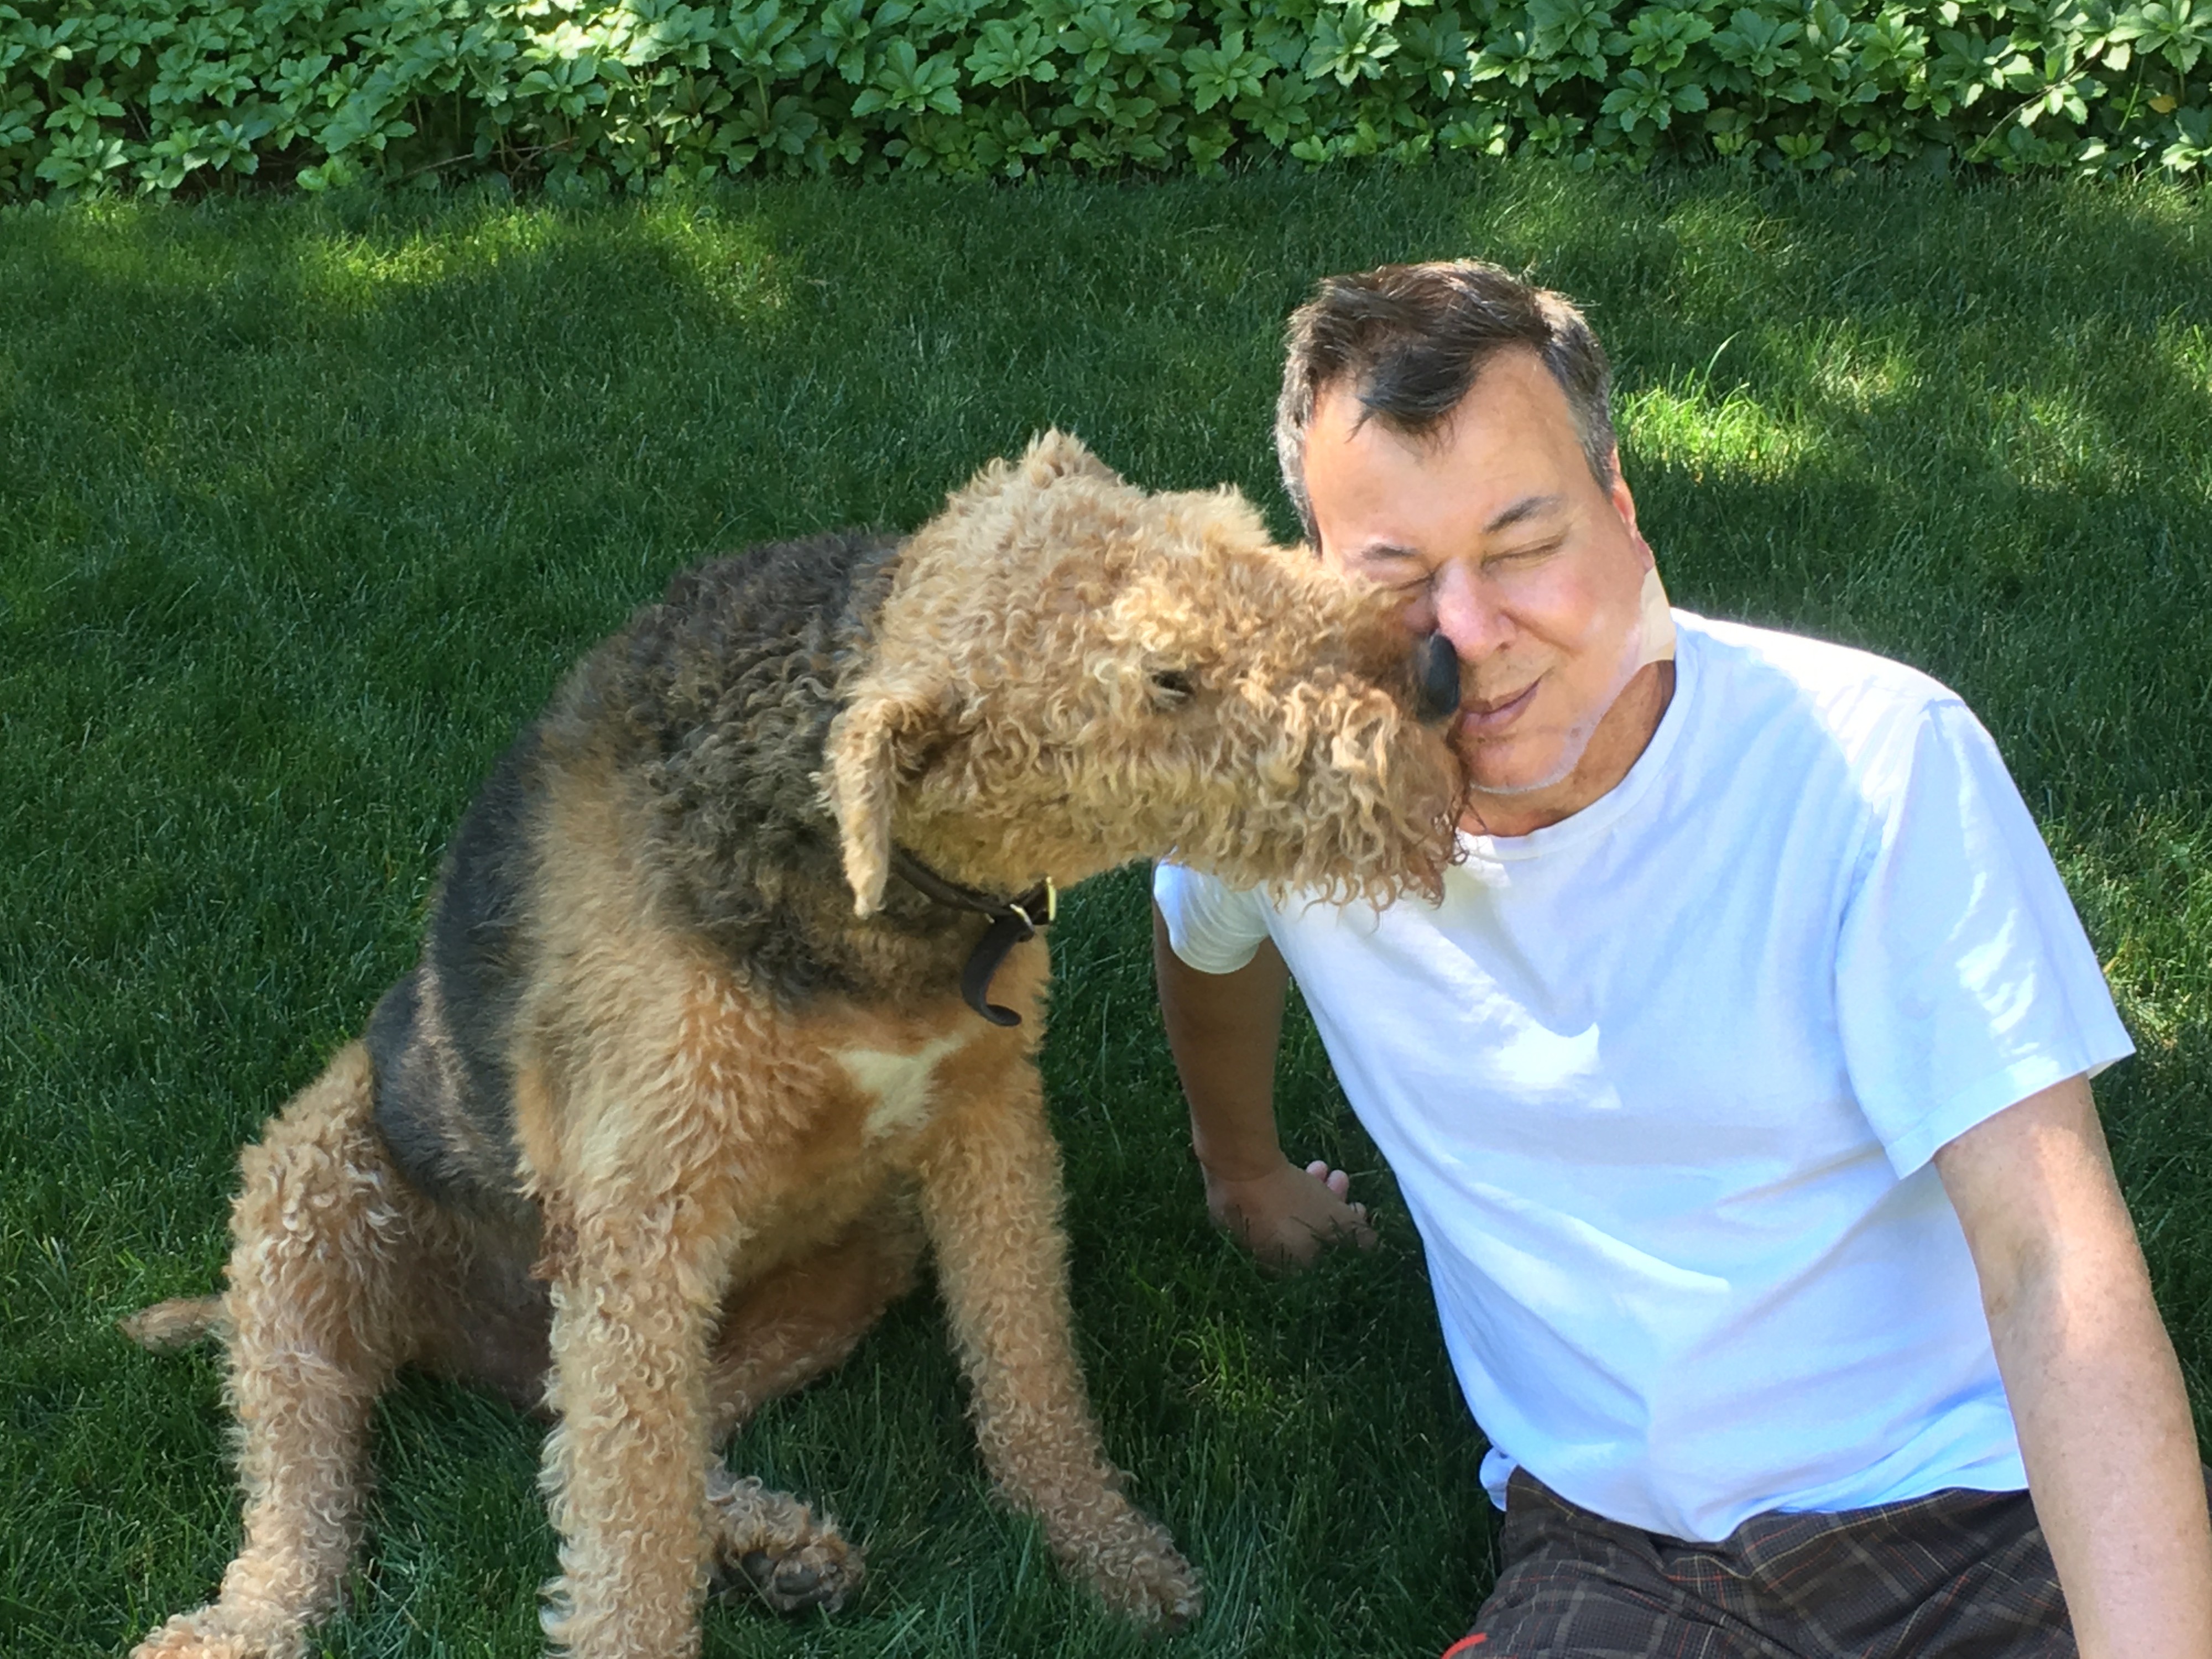 Brian Morrison with his Airedale Terrier, Cooper